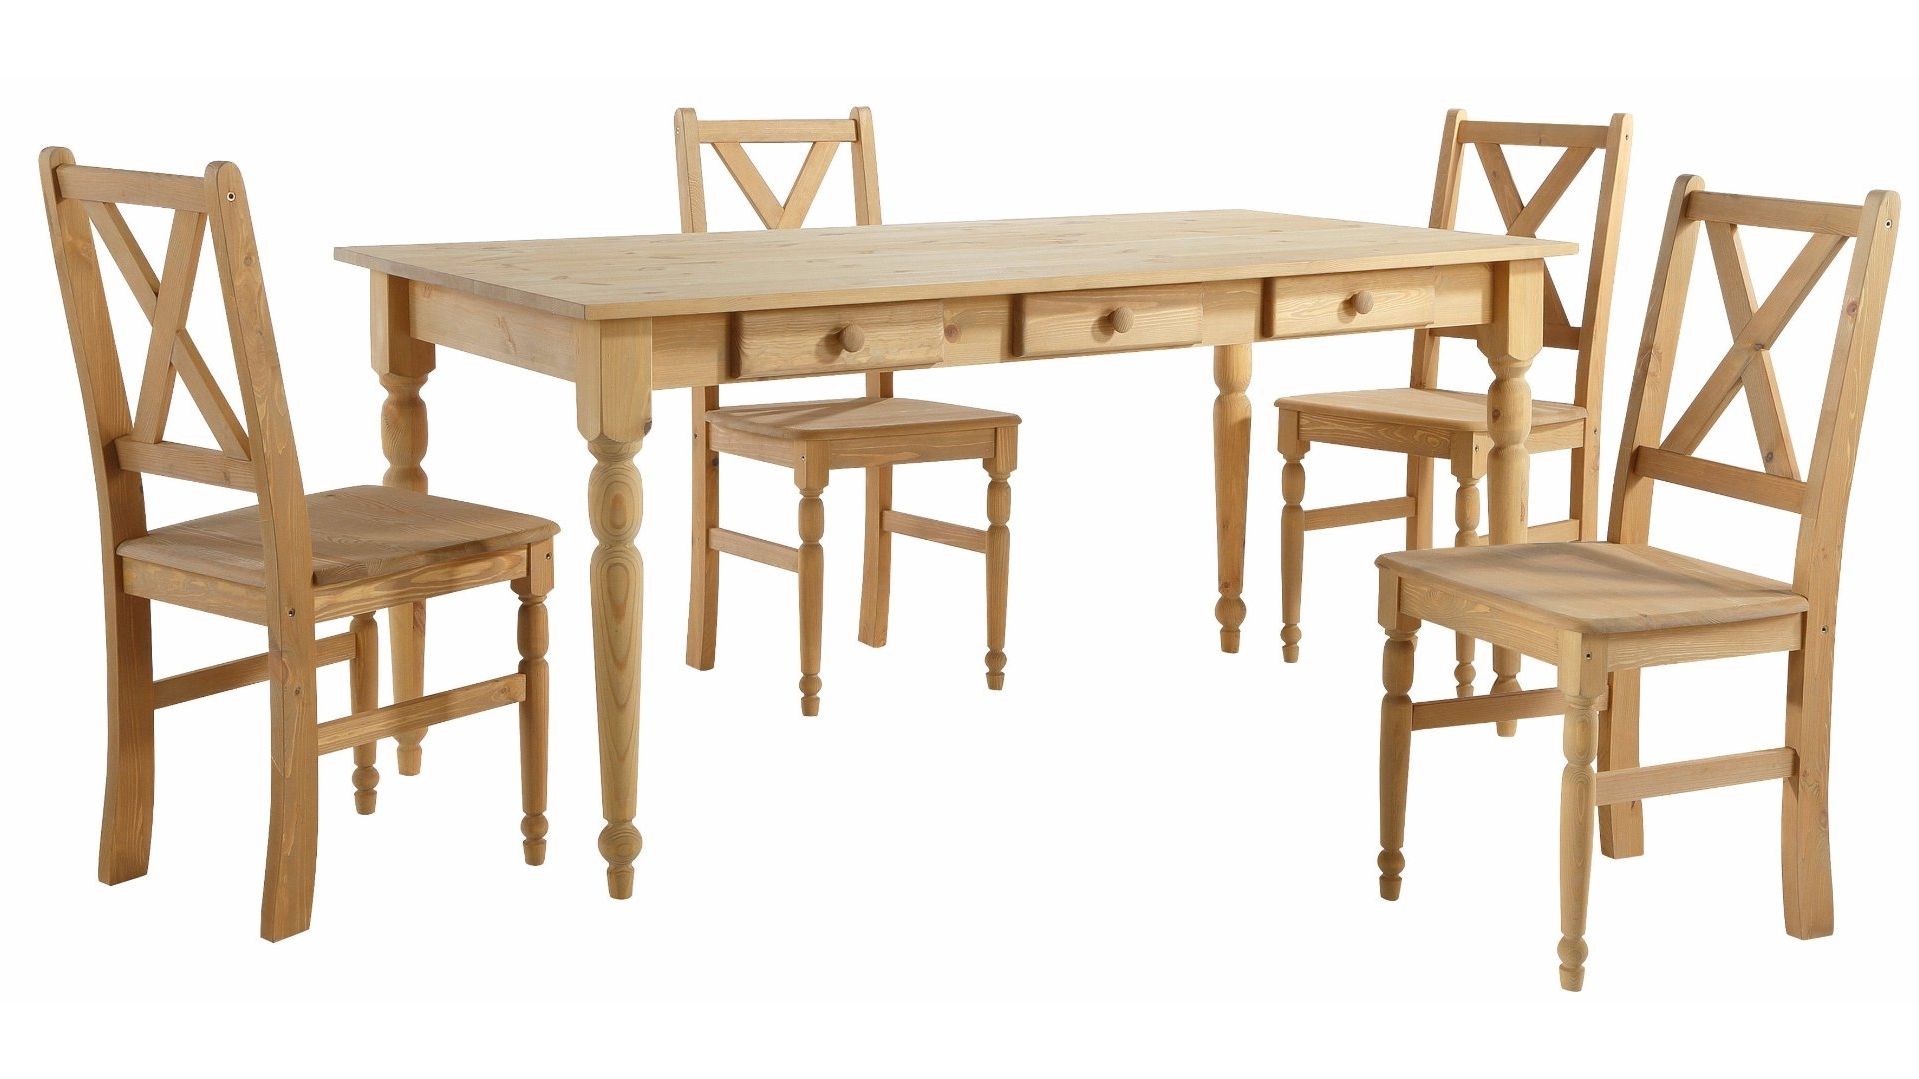 2018 Hokku Designs Noah Dining Set With 4 Chairs & Reviews (View 25 of 25)